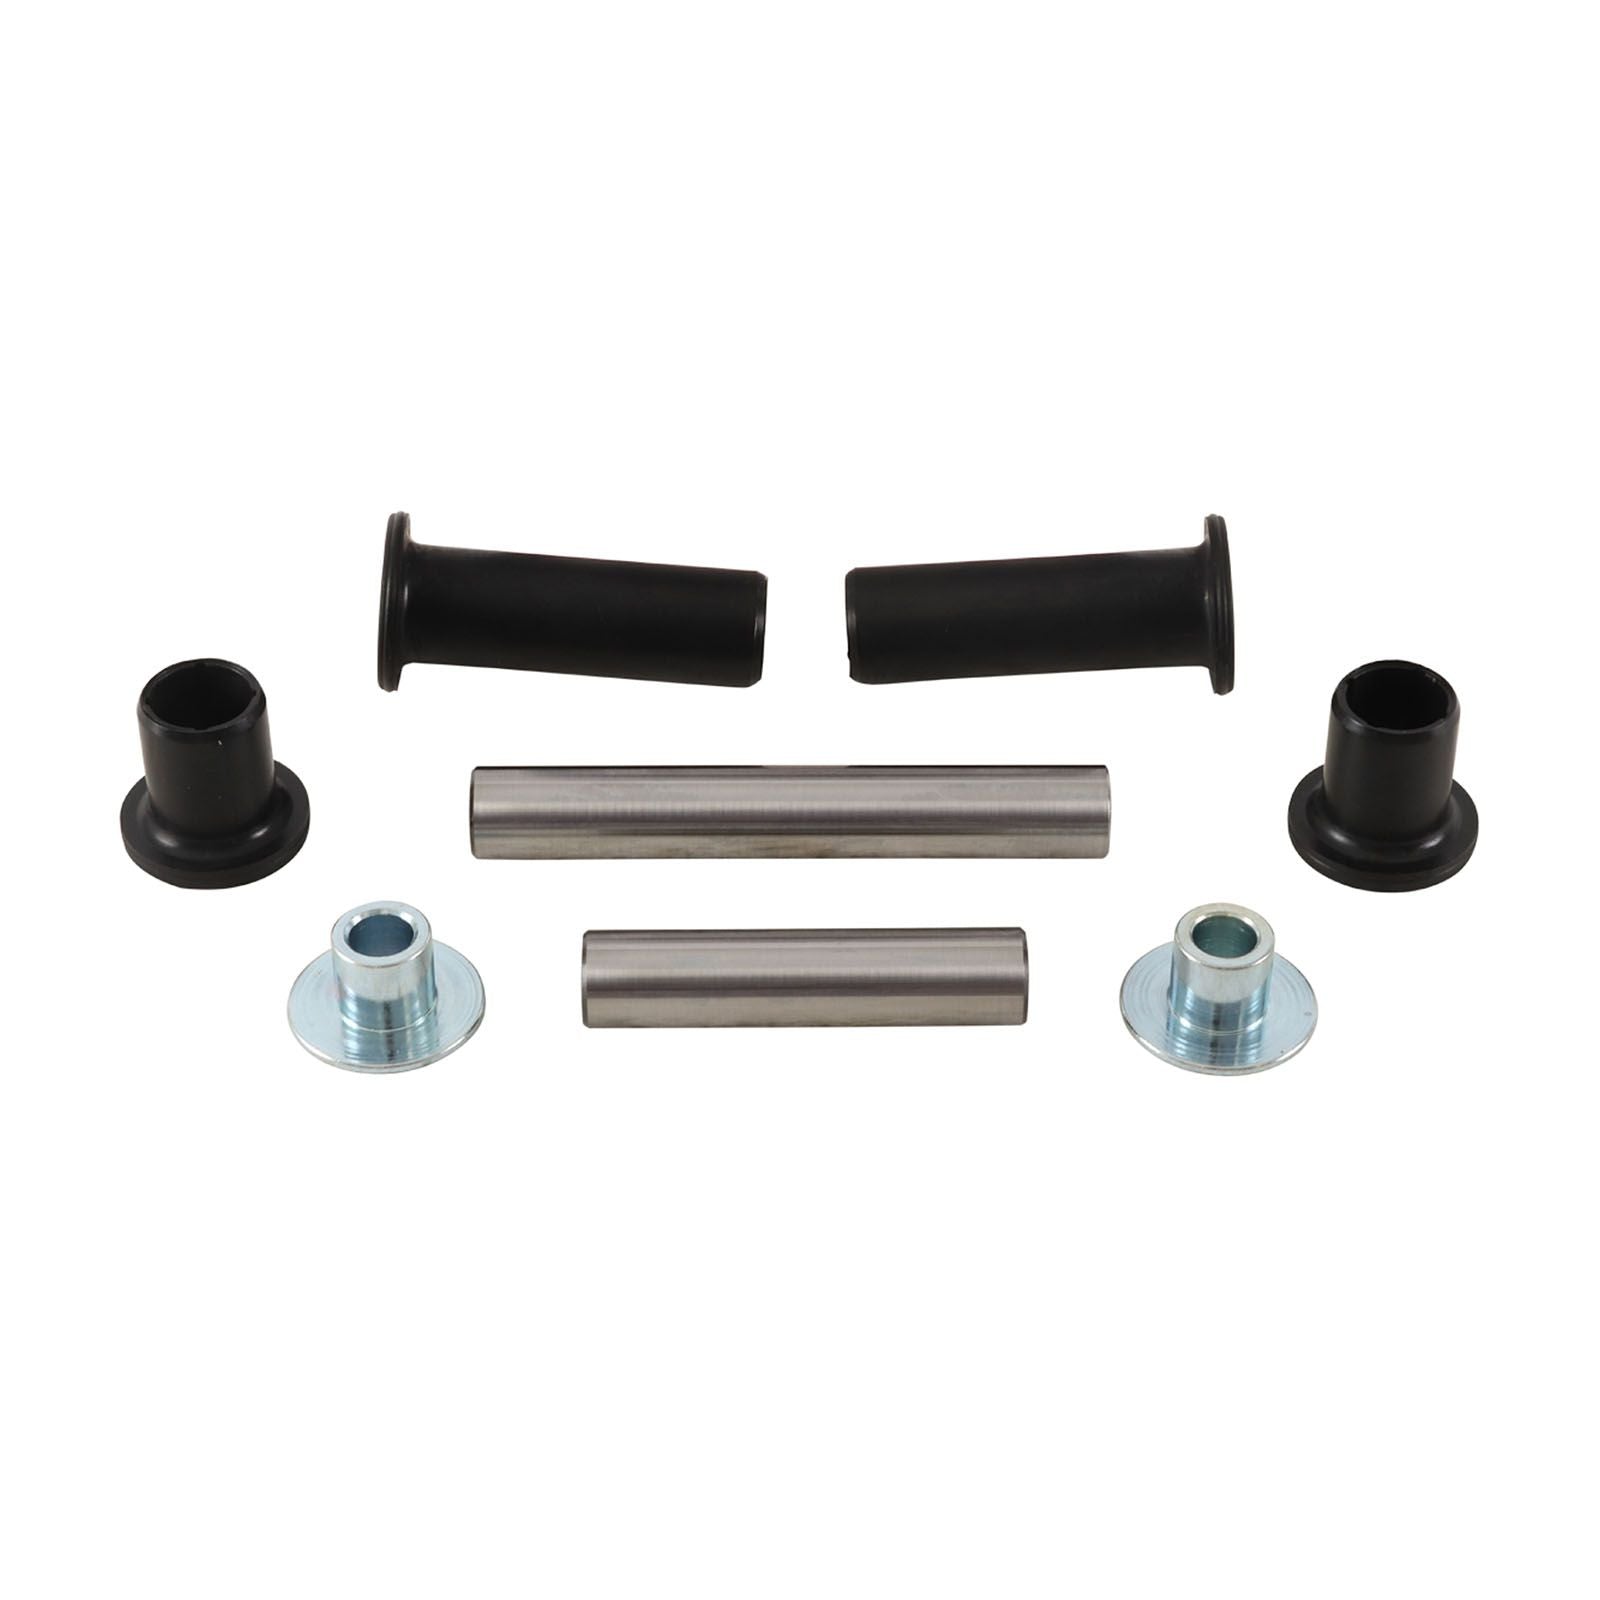 New ALL BALLS Racing Suspension Knuckle Only Kit - Rear #AB501210